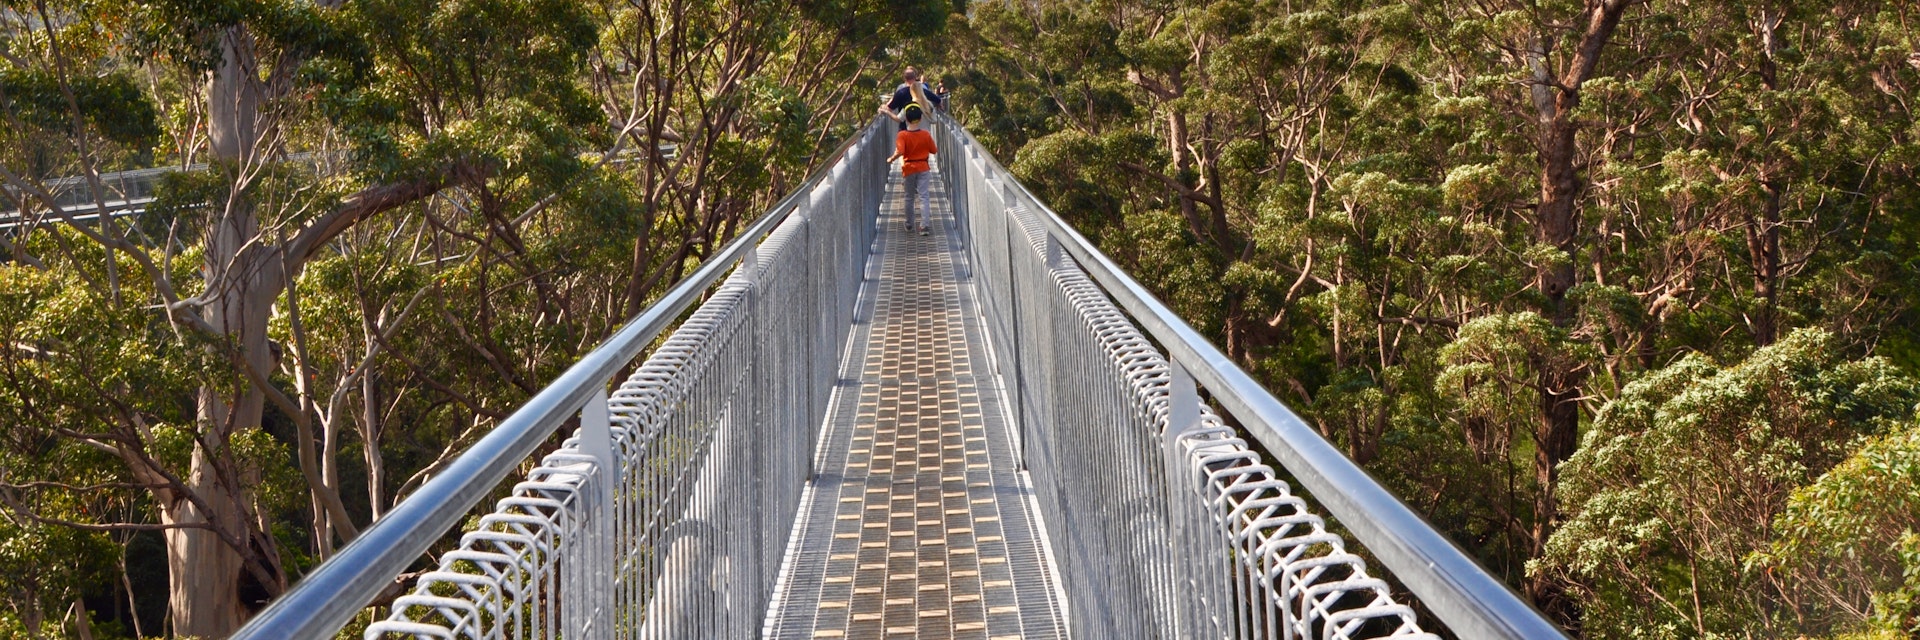 Denmark,WA,Australia-October 1, 2014: Bridge with tourists at the Tree Top Walk in the Valley of the Giants in Western Australia.